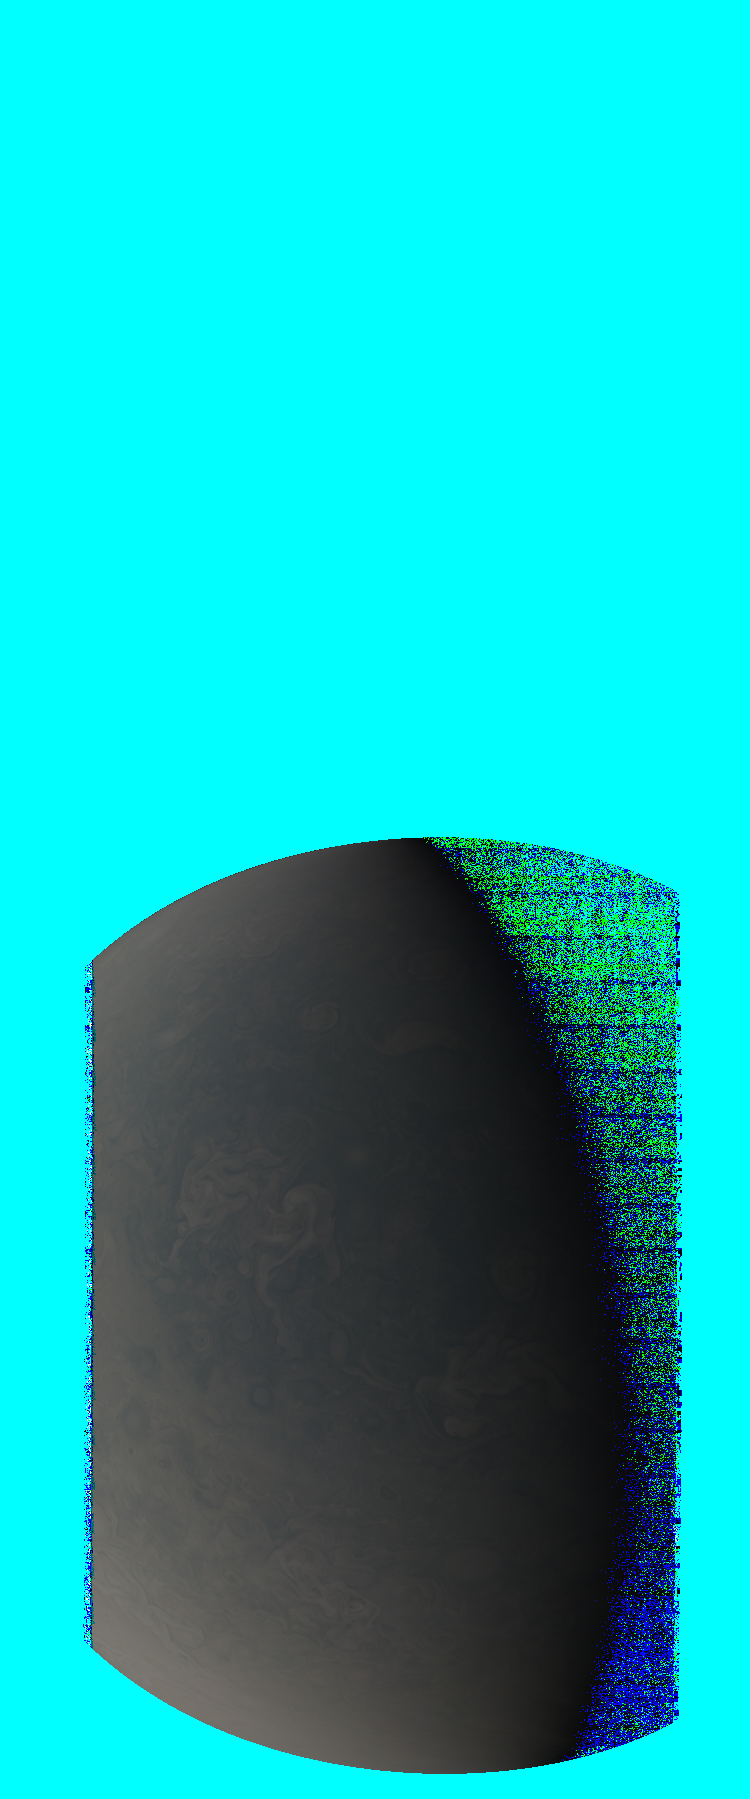 JNCE_2018250_15C00018_V01-raw.bmp_mask_10px_30.063000s_cx809.0_000000_decompanded.bmp_sphC_.png